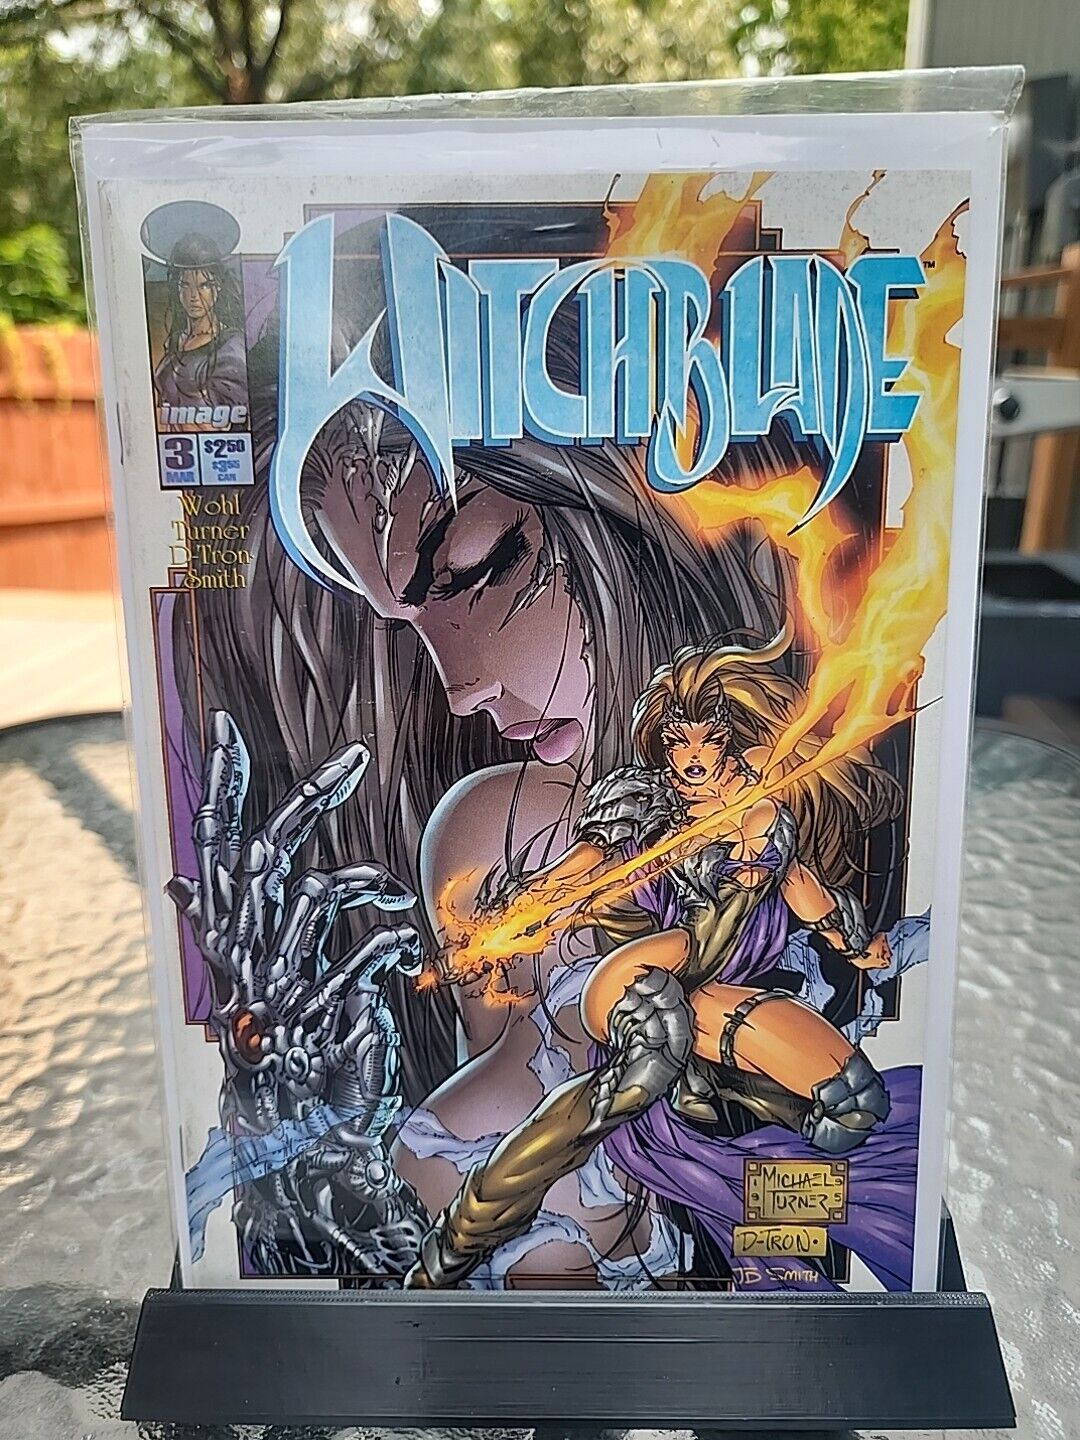 Witchblade Comic Book Issue #3 Image Top Cow Comics 1996 Michael Turner B